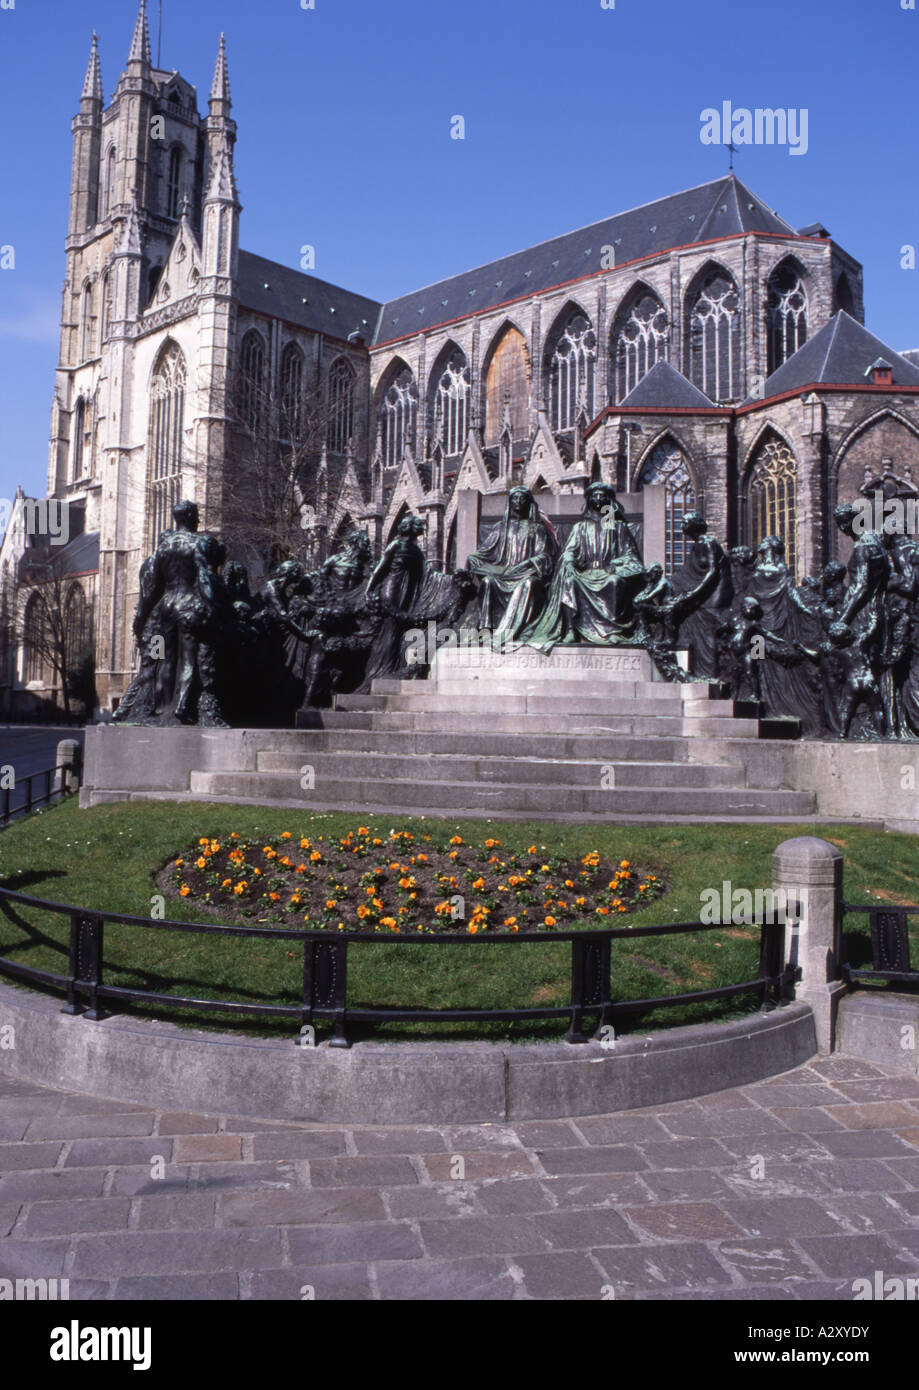 St Bavon Cathedral and Van Eyck Monument Ghent Belgium Stock Photo